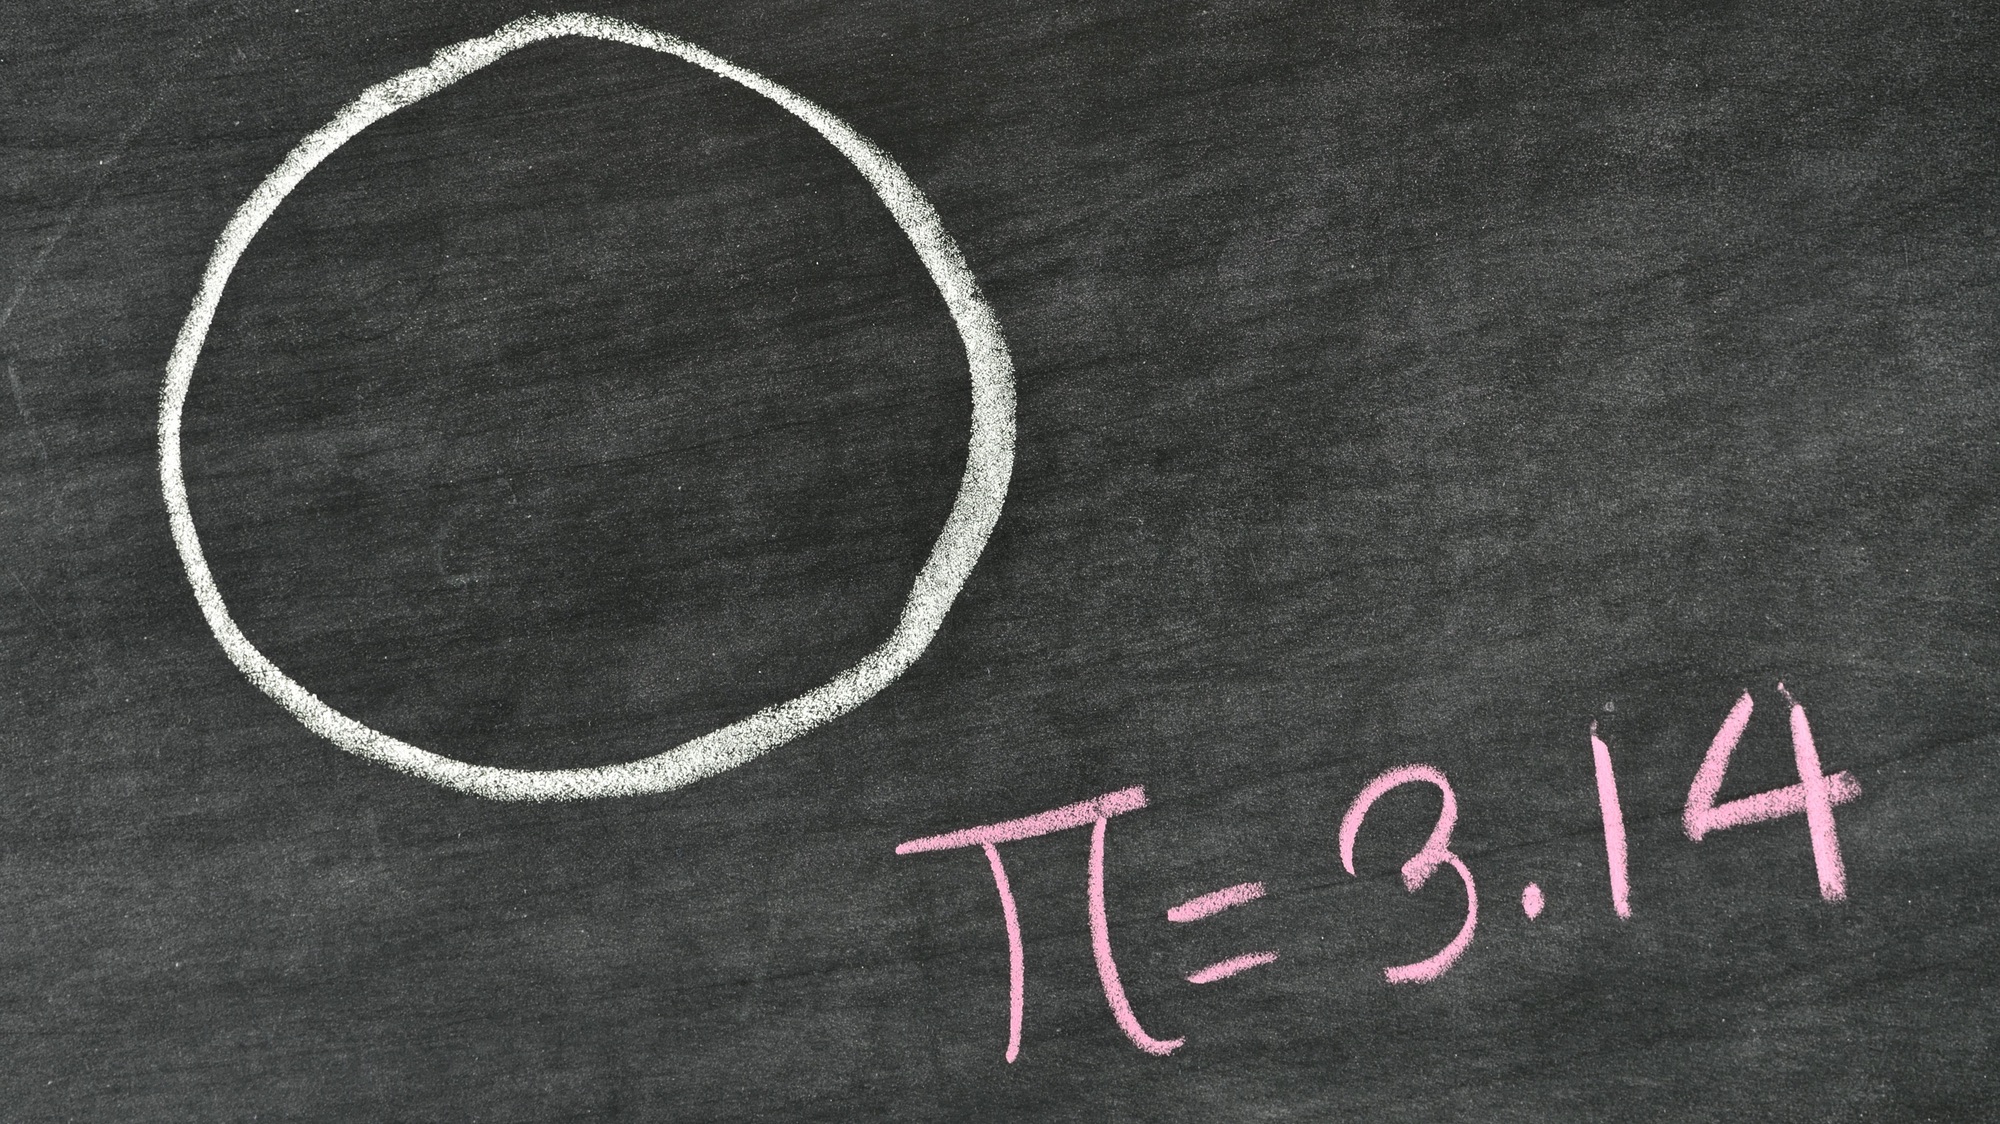 a circle and pi = 3.14 written on a chalkboard